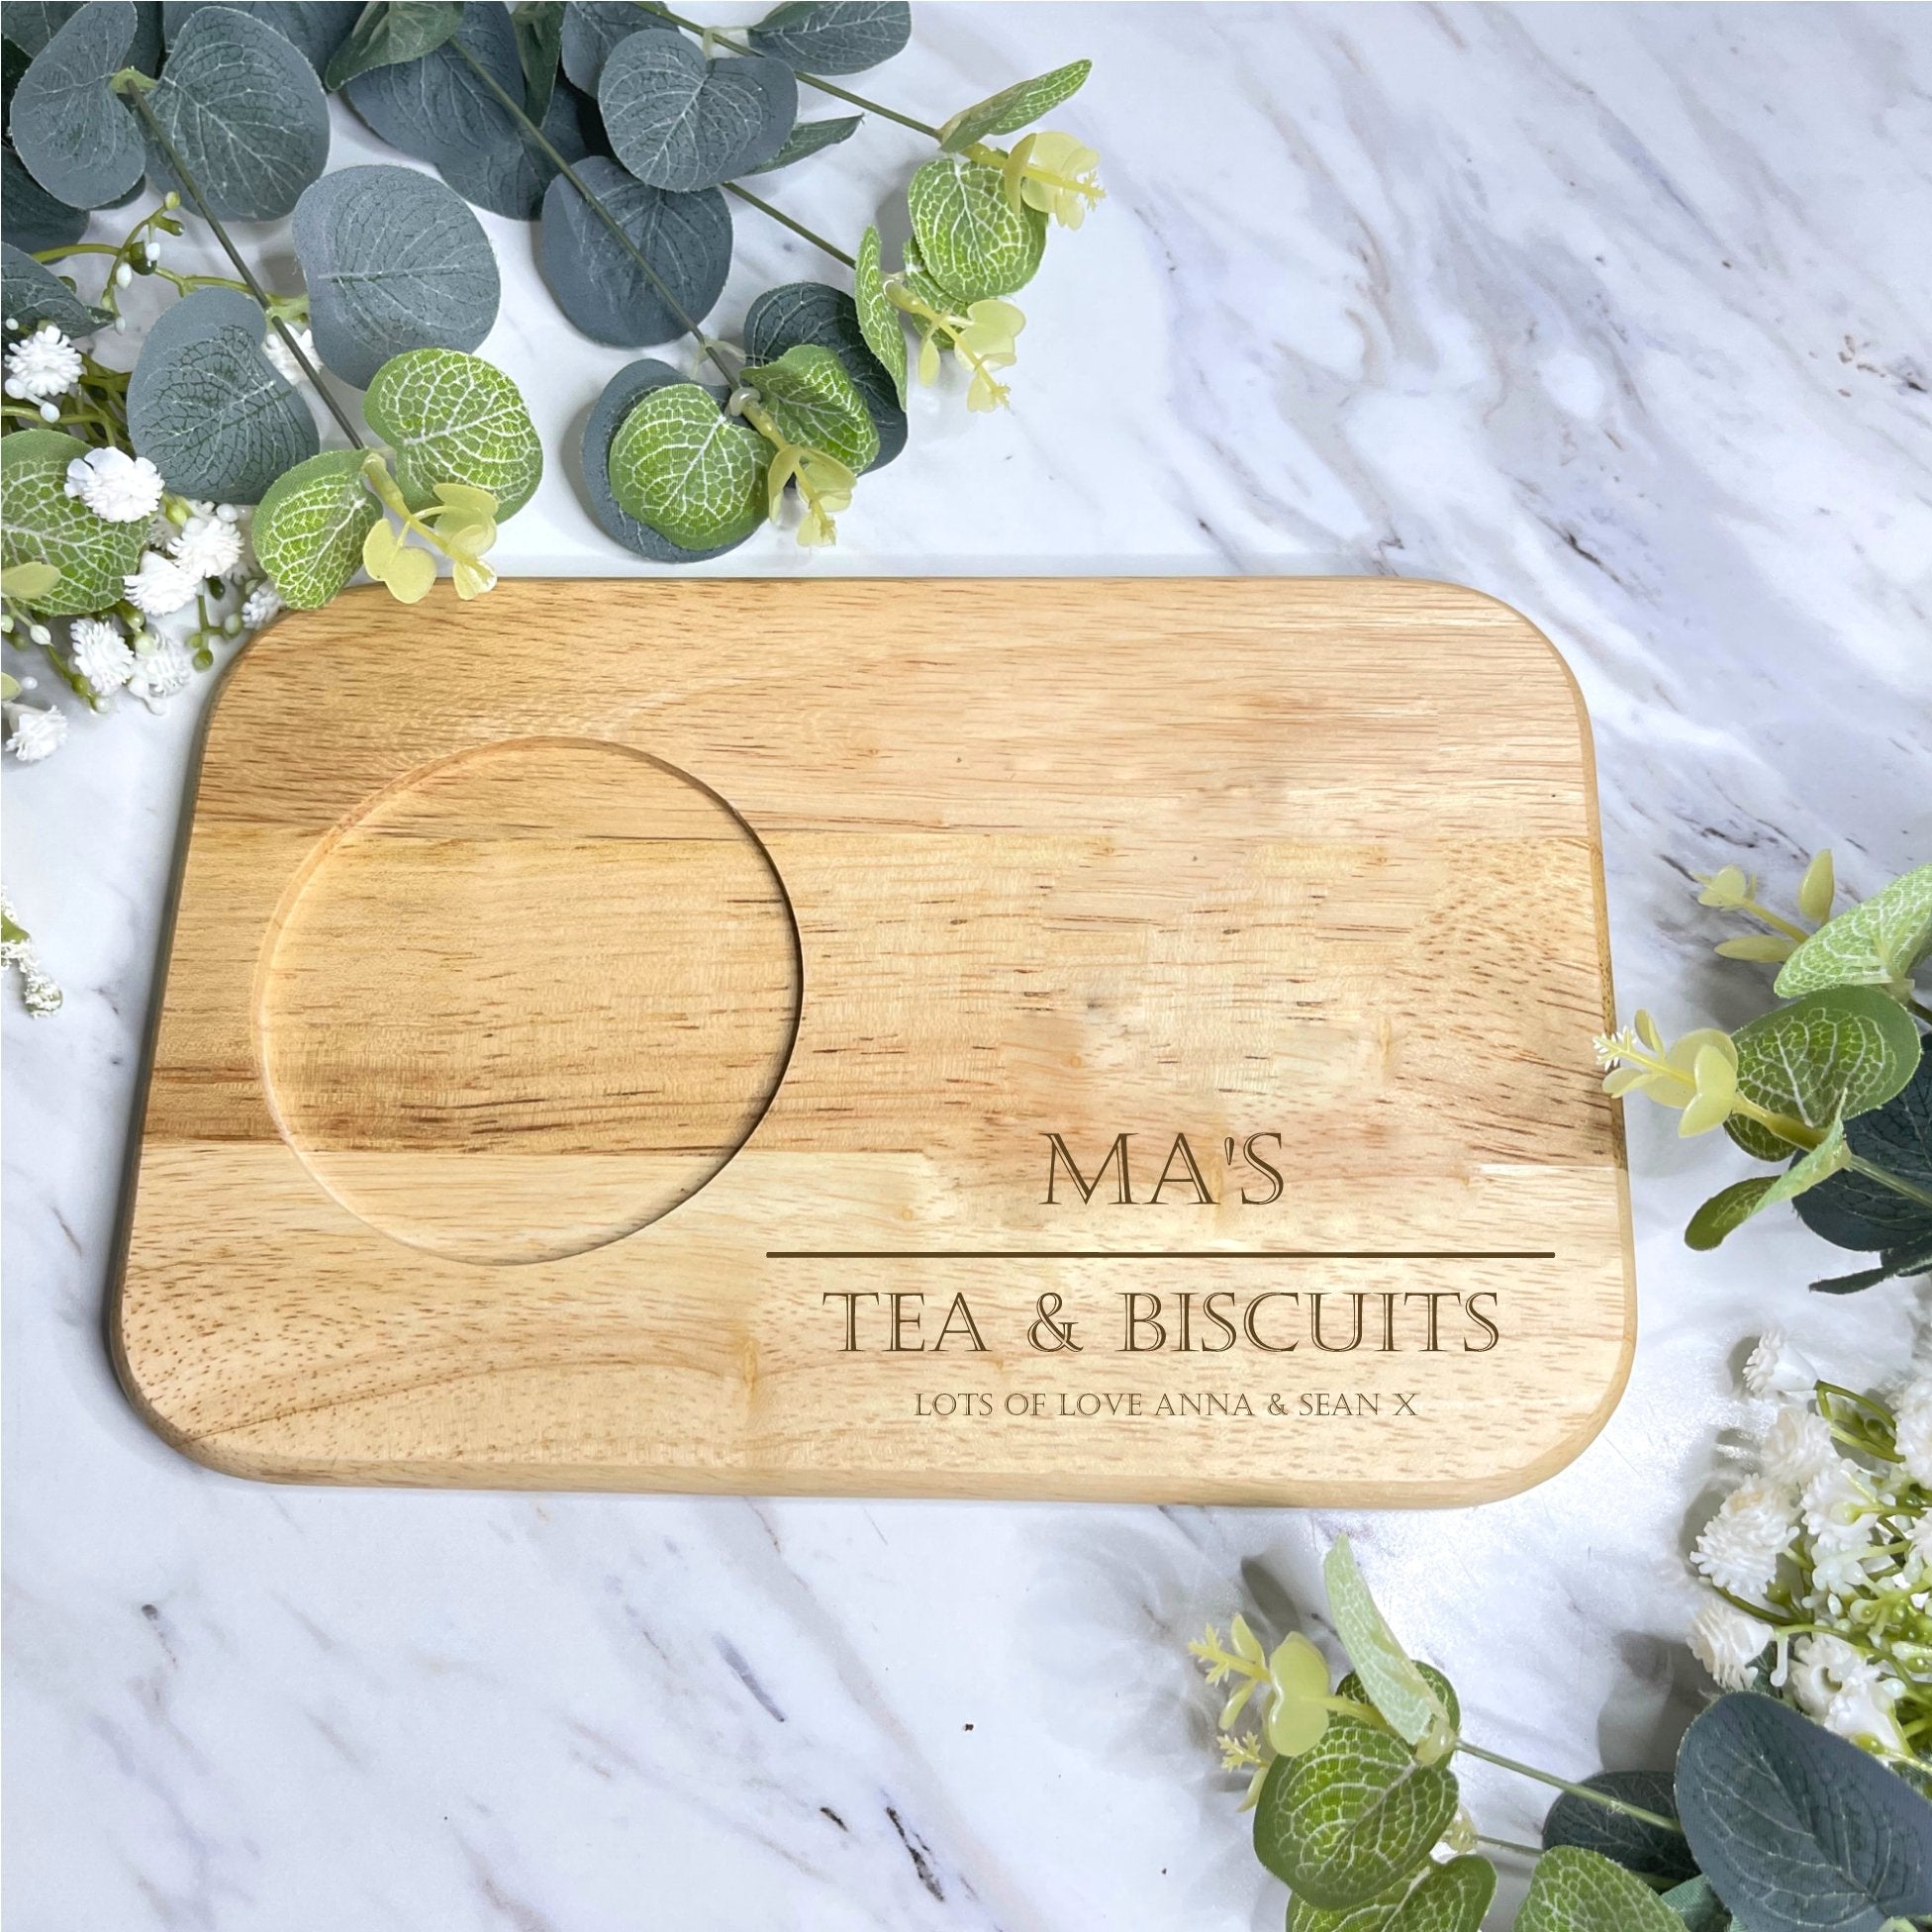  A Tea & Biscuit Board crafted from top-grade wood, ideal for gifting to someone who enjoys warm drinks and treats. Engraved with care, it's suitable for various occasions such as Mother's Day, birthdays, and Christmas. The board's dimensions are 23cm x 15cm x 1.5cm, perfect for hosting stylish afternoon teas.